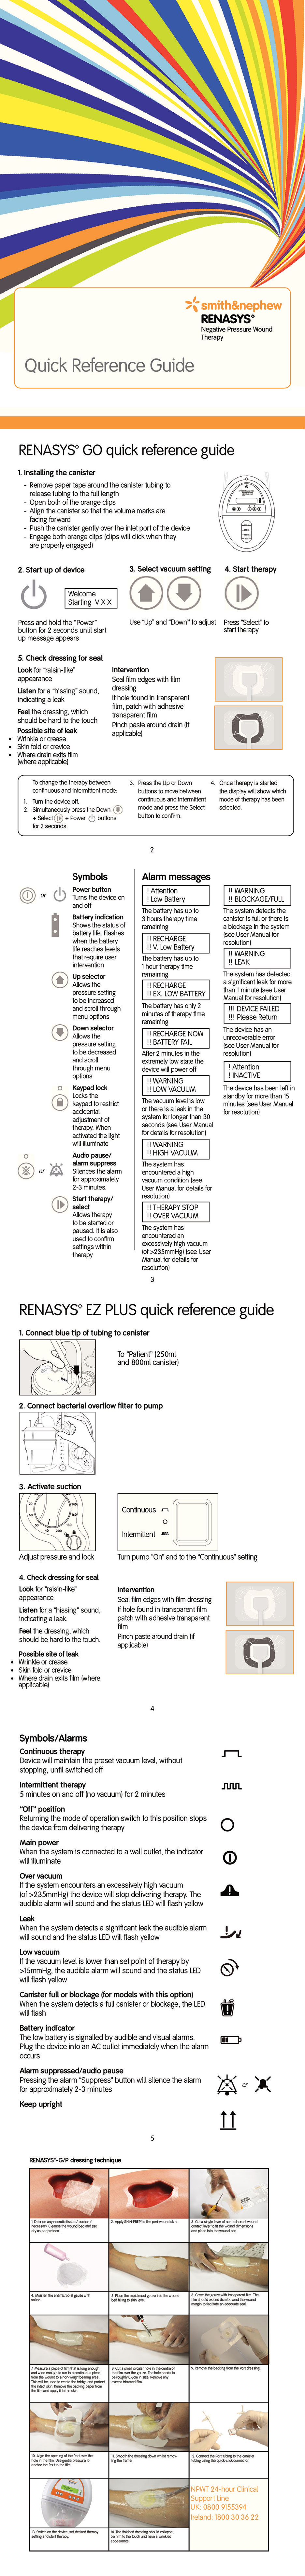 RENASYS UKI Quick Ref Guide (with soft port) July 13